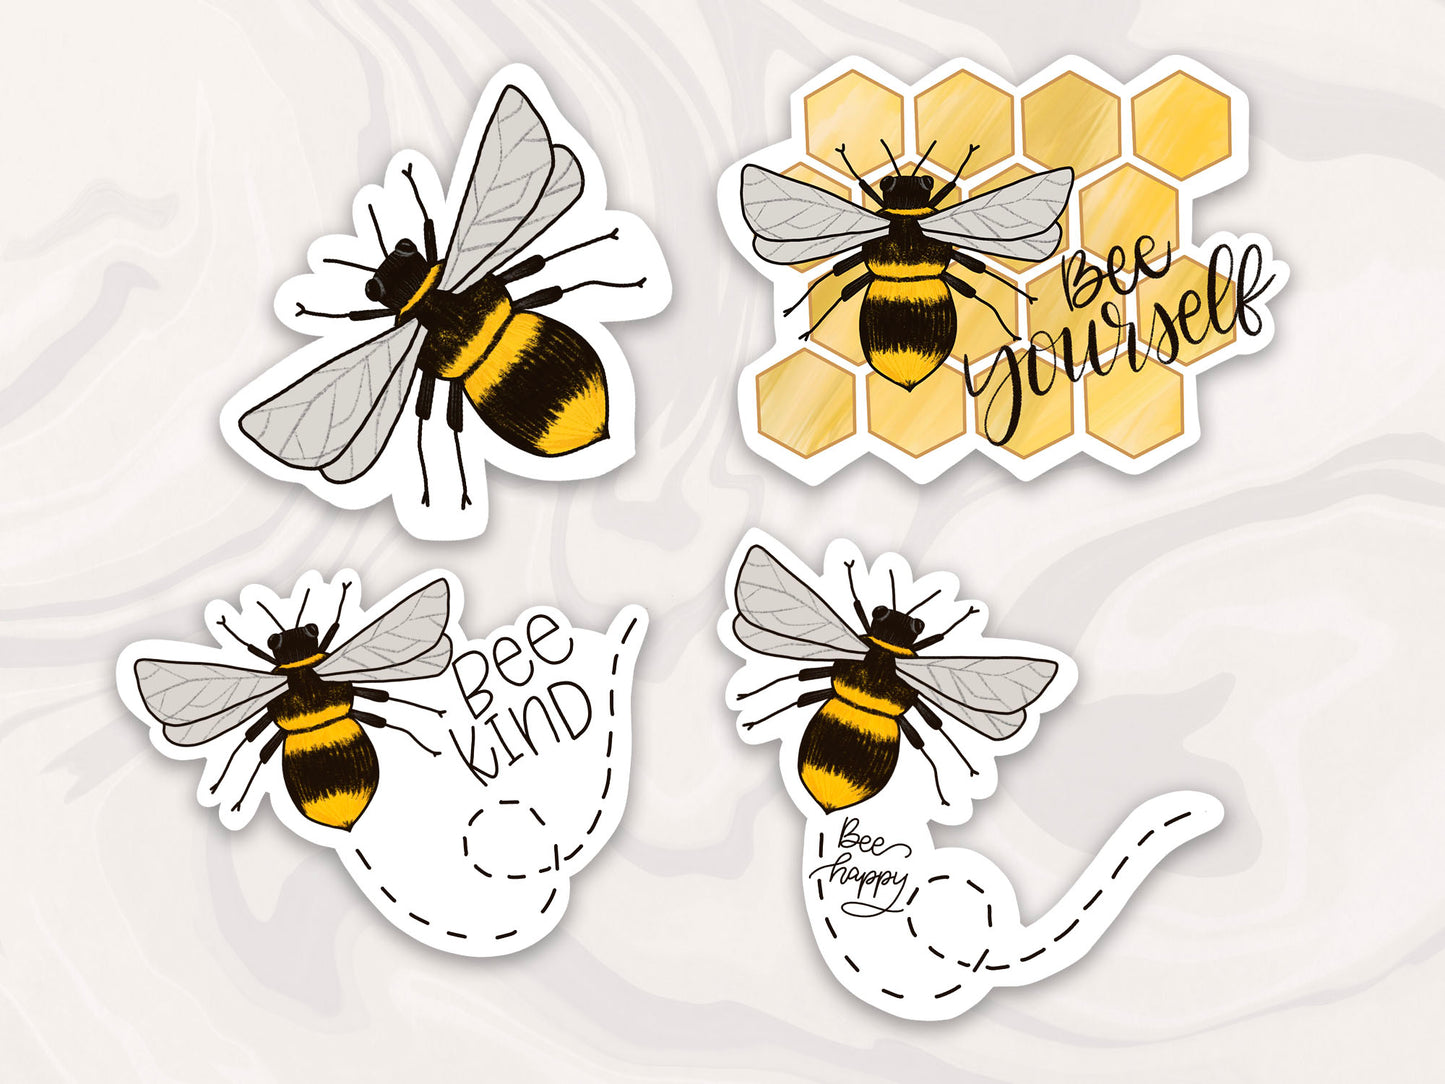 bumble bee sticker set, set of 4 bee themed stickers with positive and encouraging messages